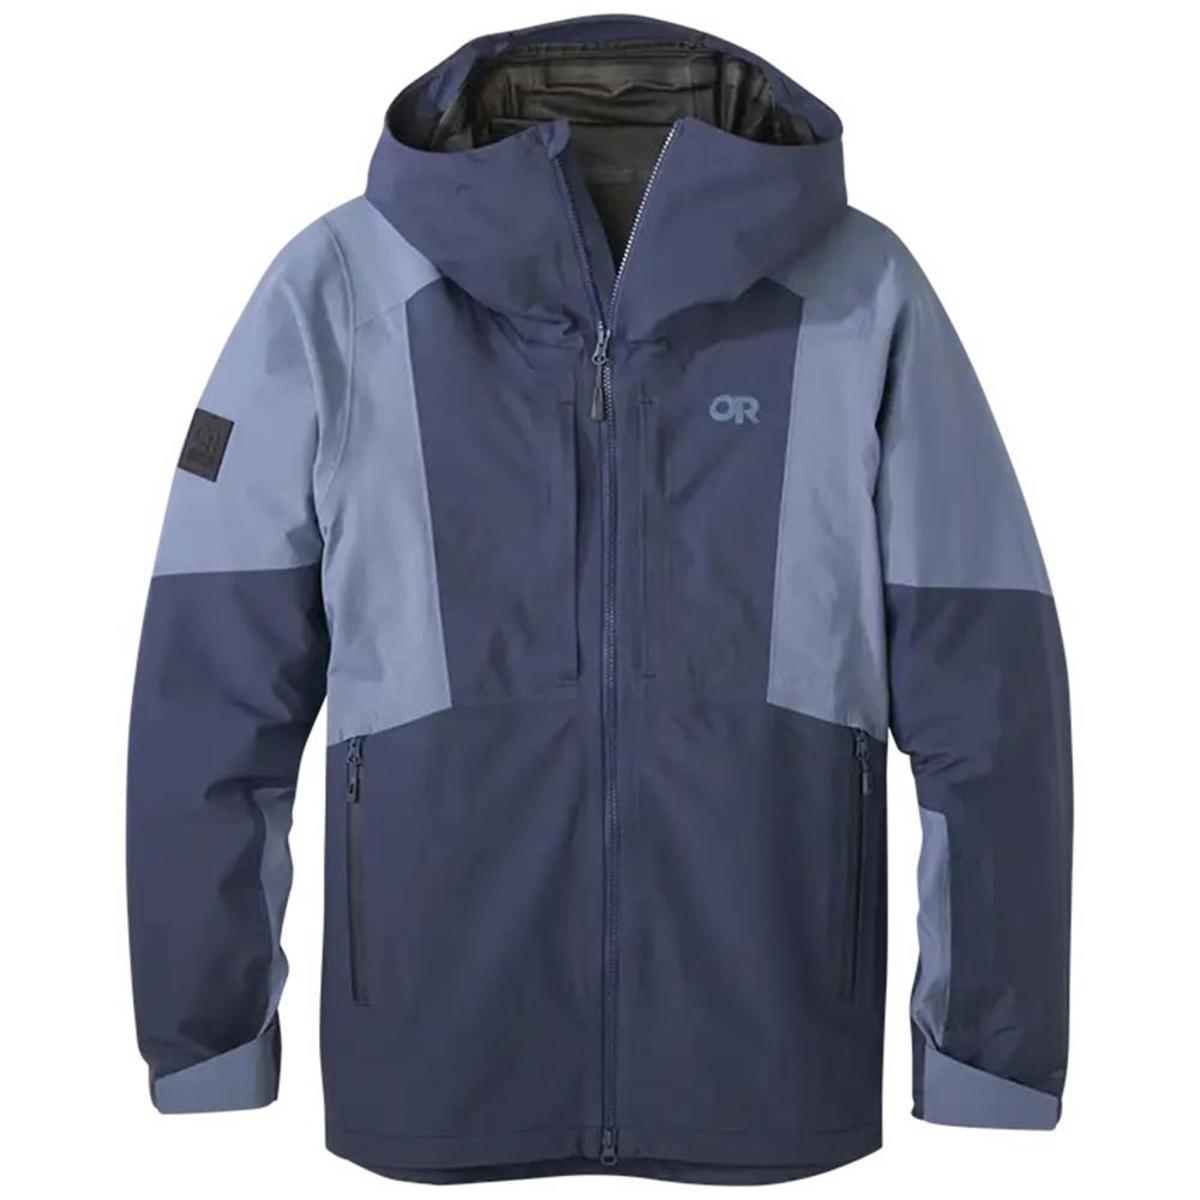 Outdoor Research Men's Skytour AscentShell Jacket